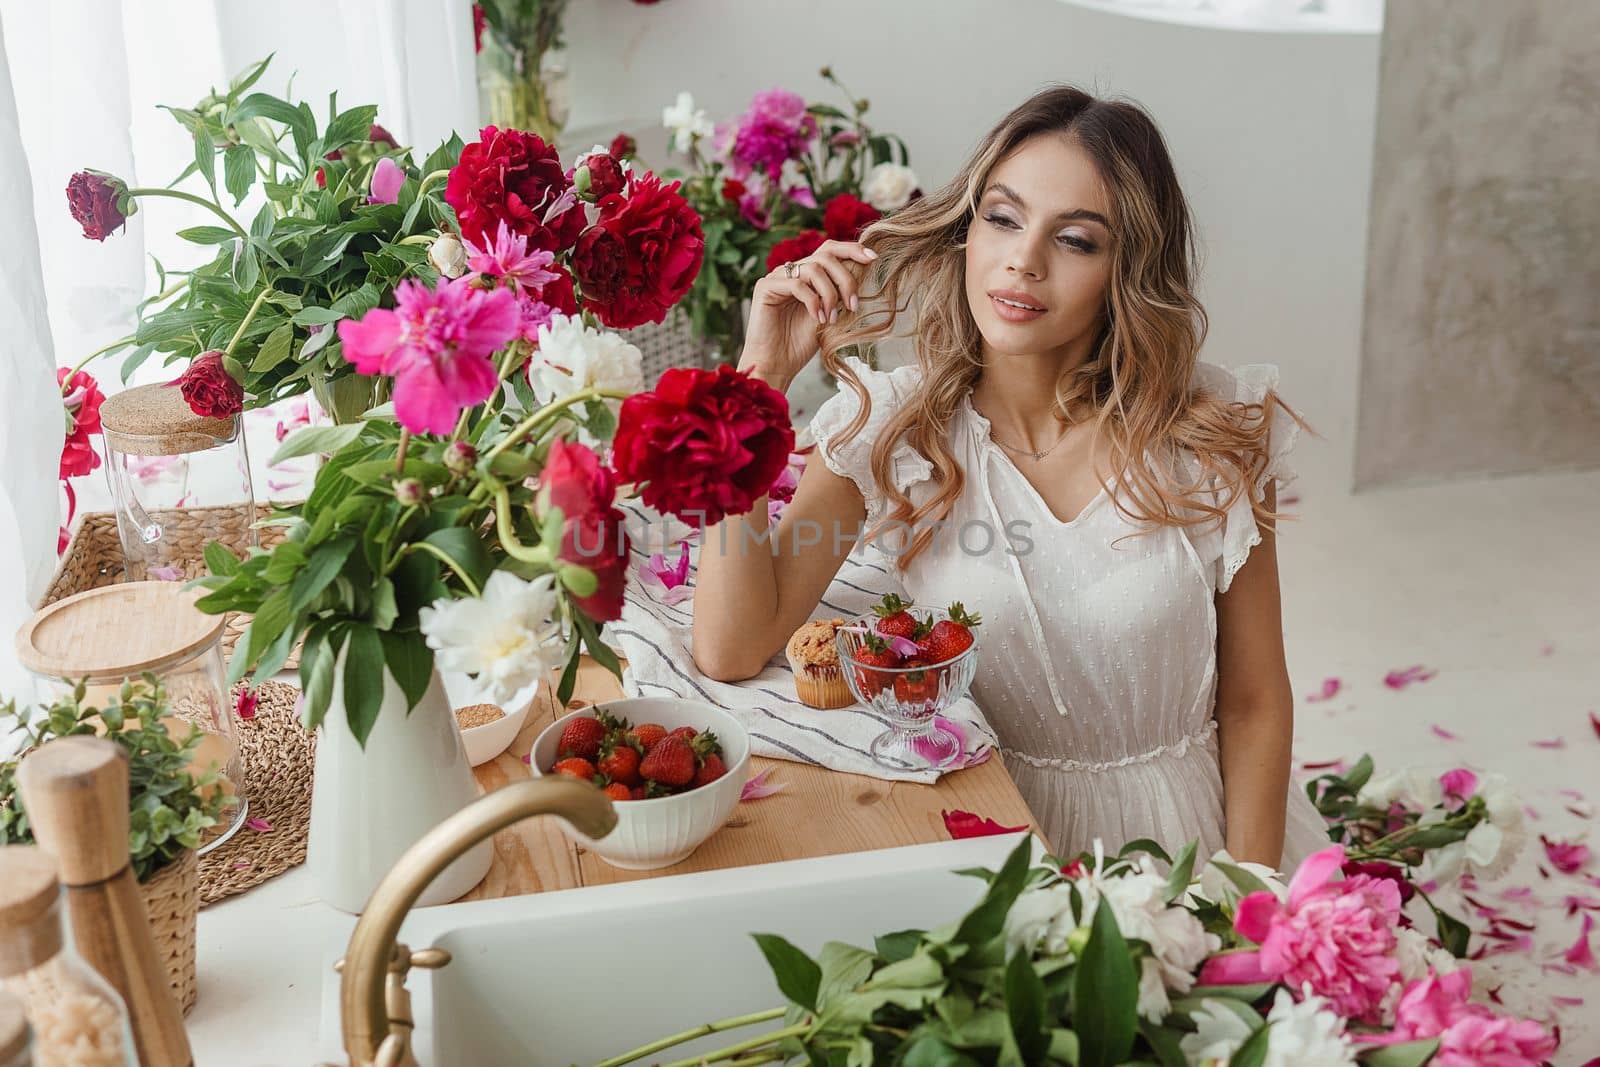 A beautiful girl in a white nightgown at home surrounded by spring flowers. A room decorated with bouquets of peonies. by Annu1tochka